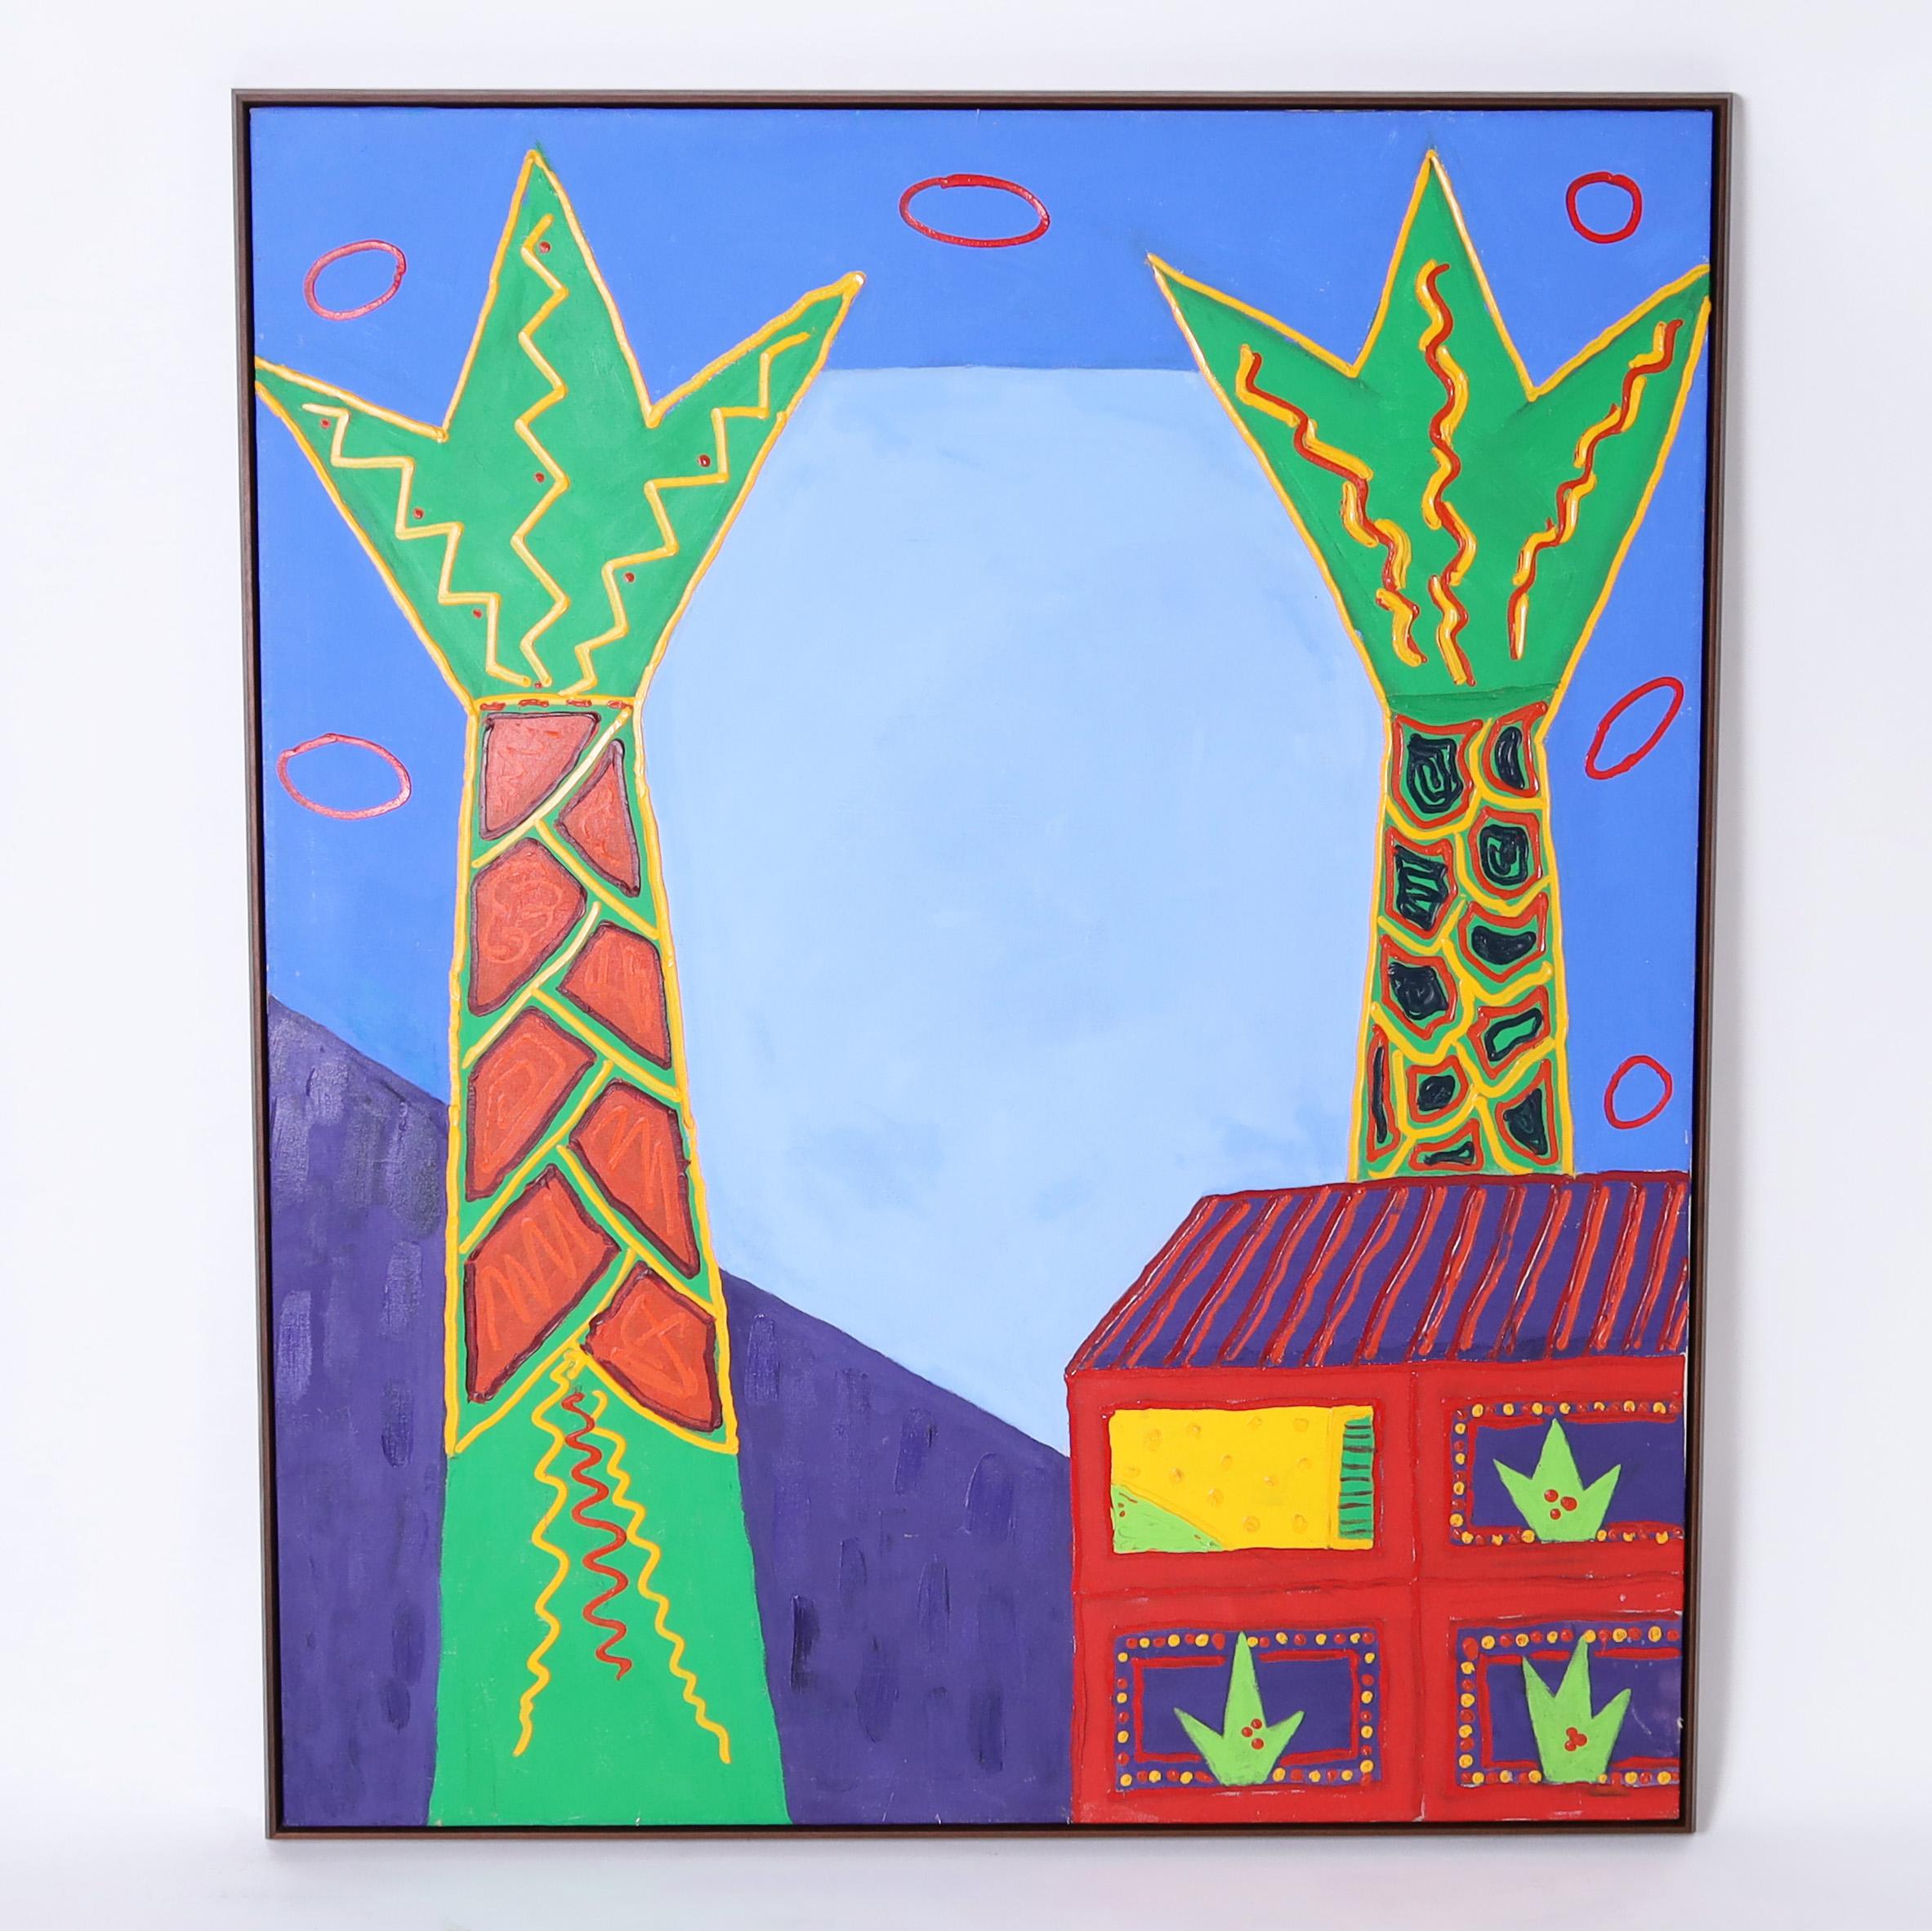 Striking acrylic painting on canvas of a house with palm trees executed in a bold modernist style with primary colors and a sense of exaggeration by Palm Beach artist Barbara Sturgill titled House with Blue Sky and presented in a wood frame. 